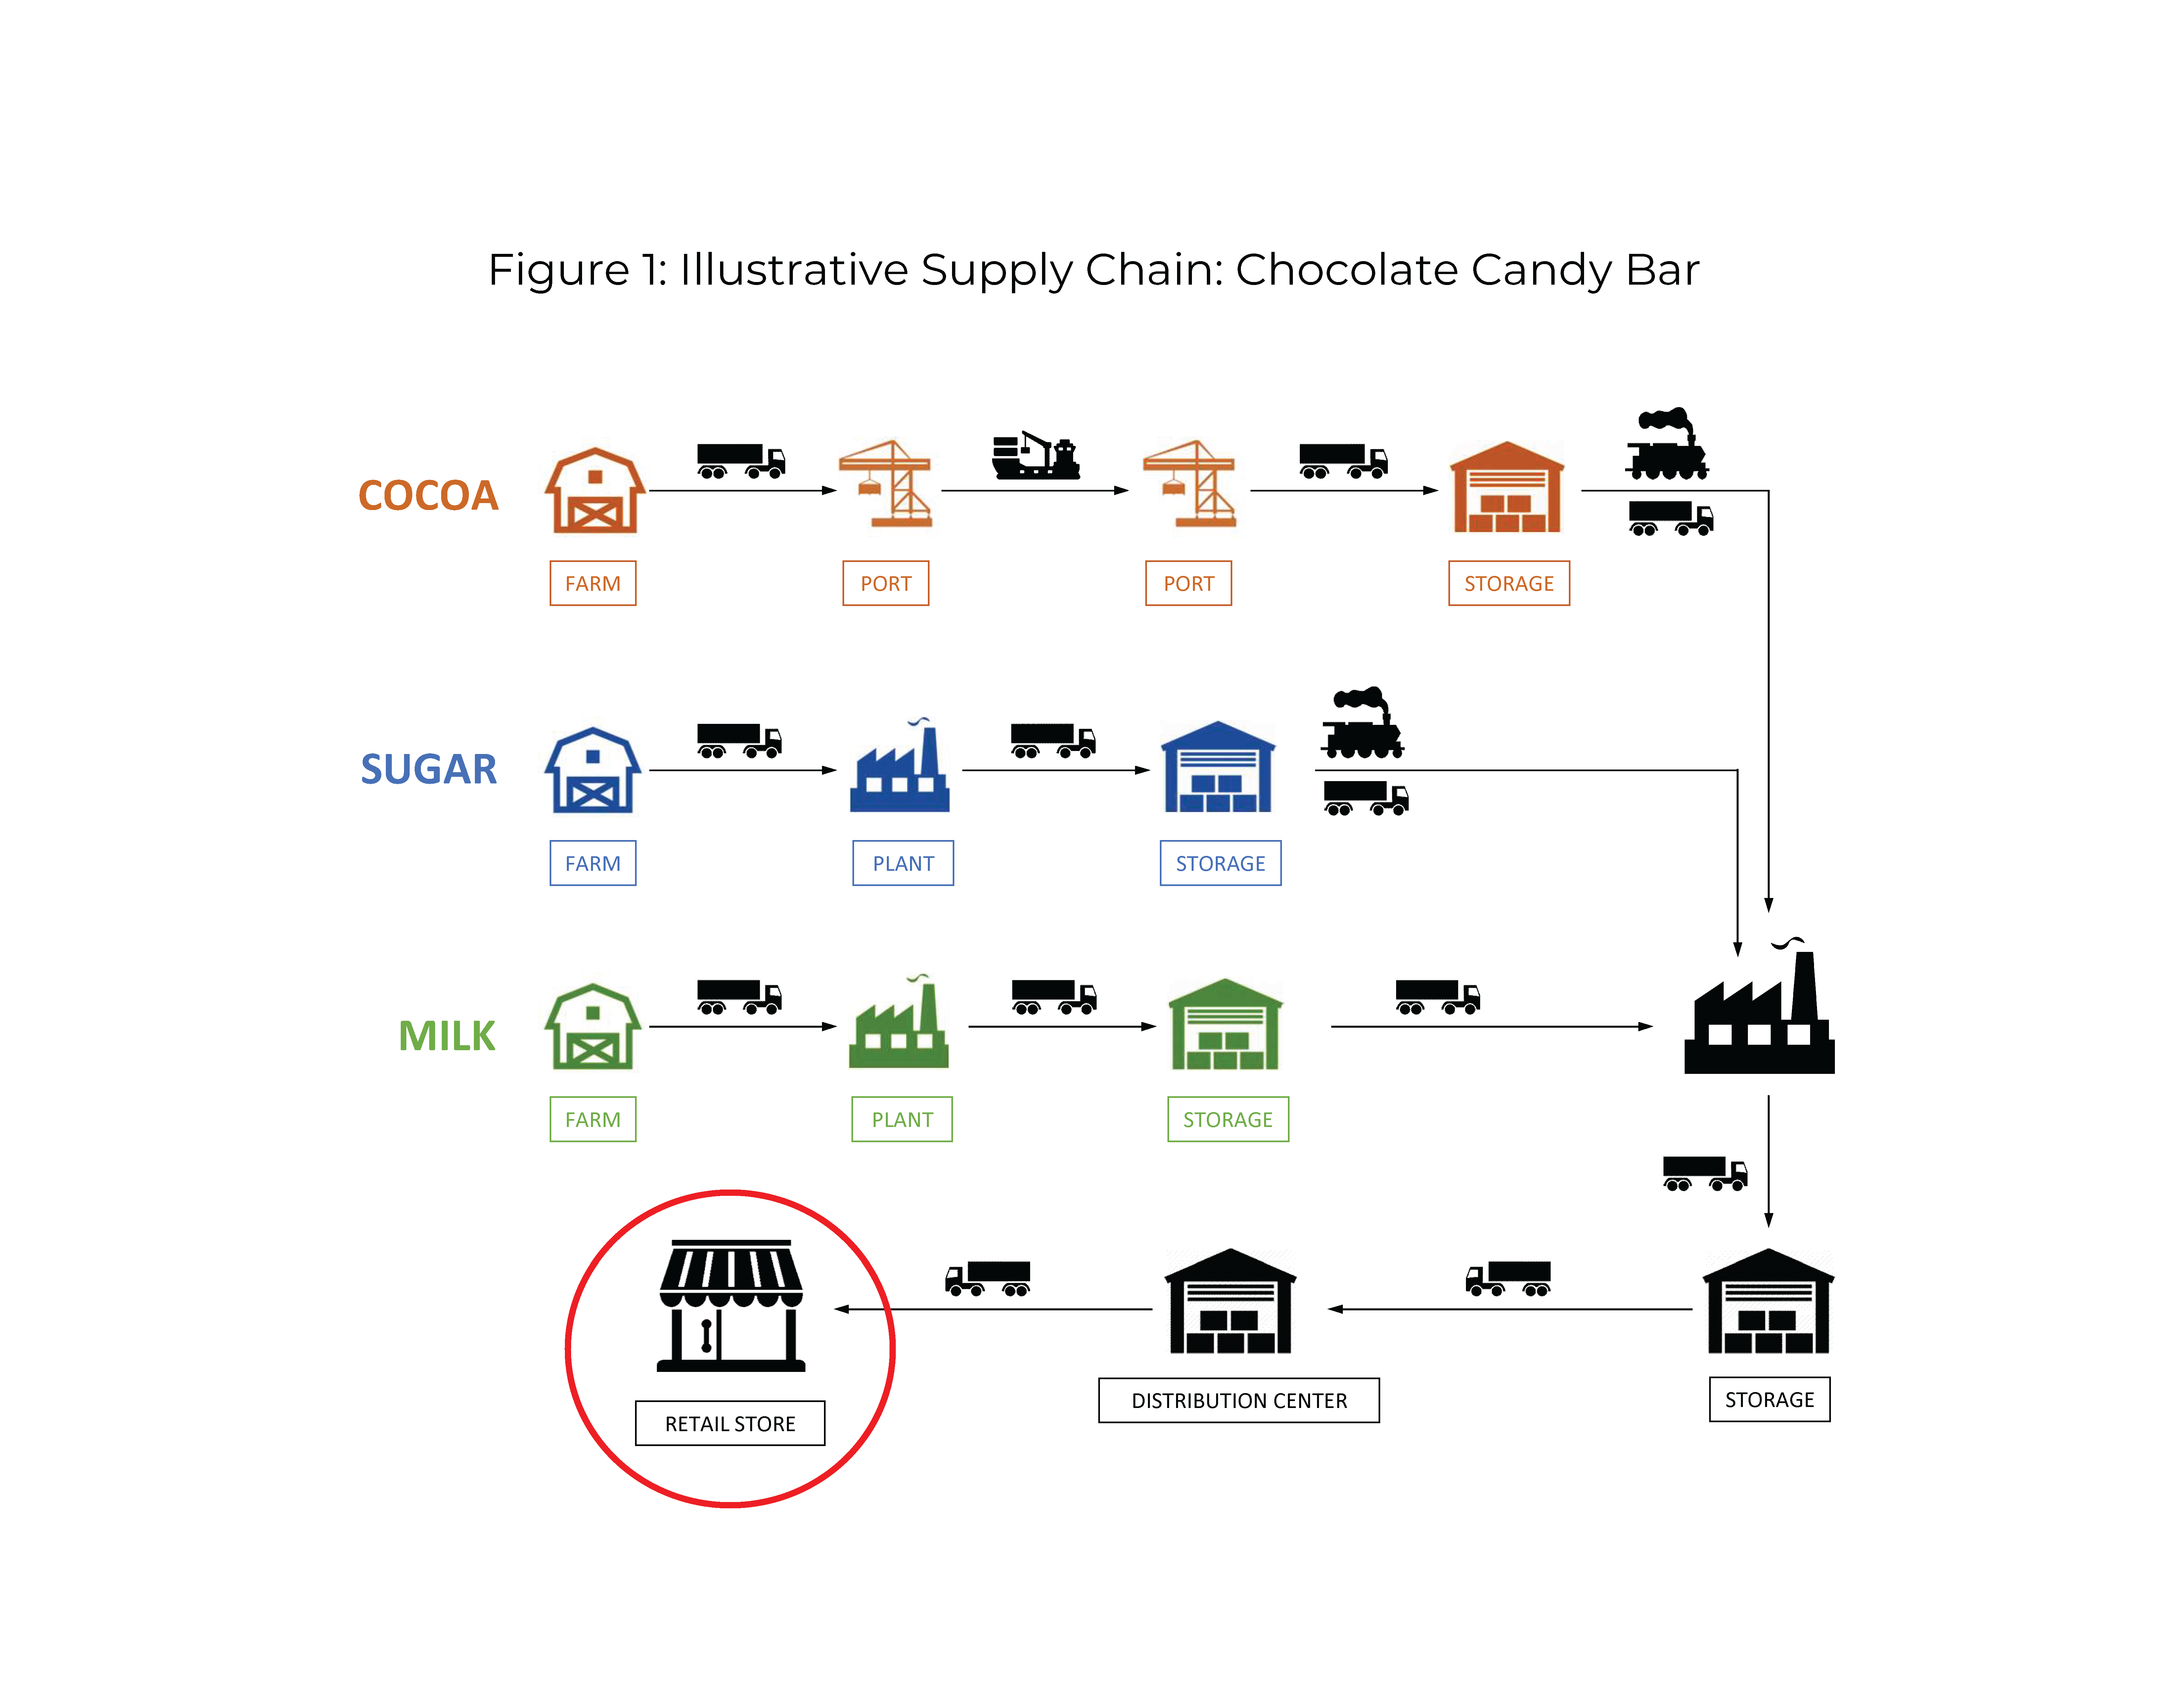 A figure showing the Illustrative Supply Chain model of a Chocolate Candy bar